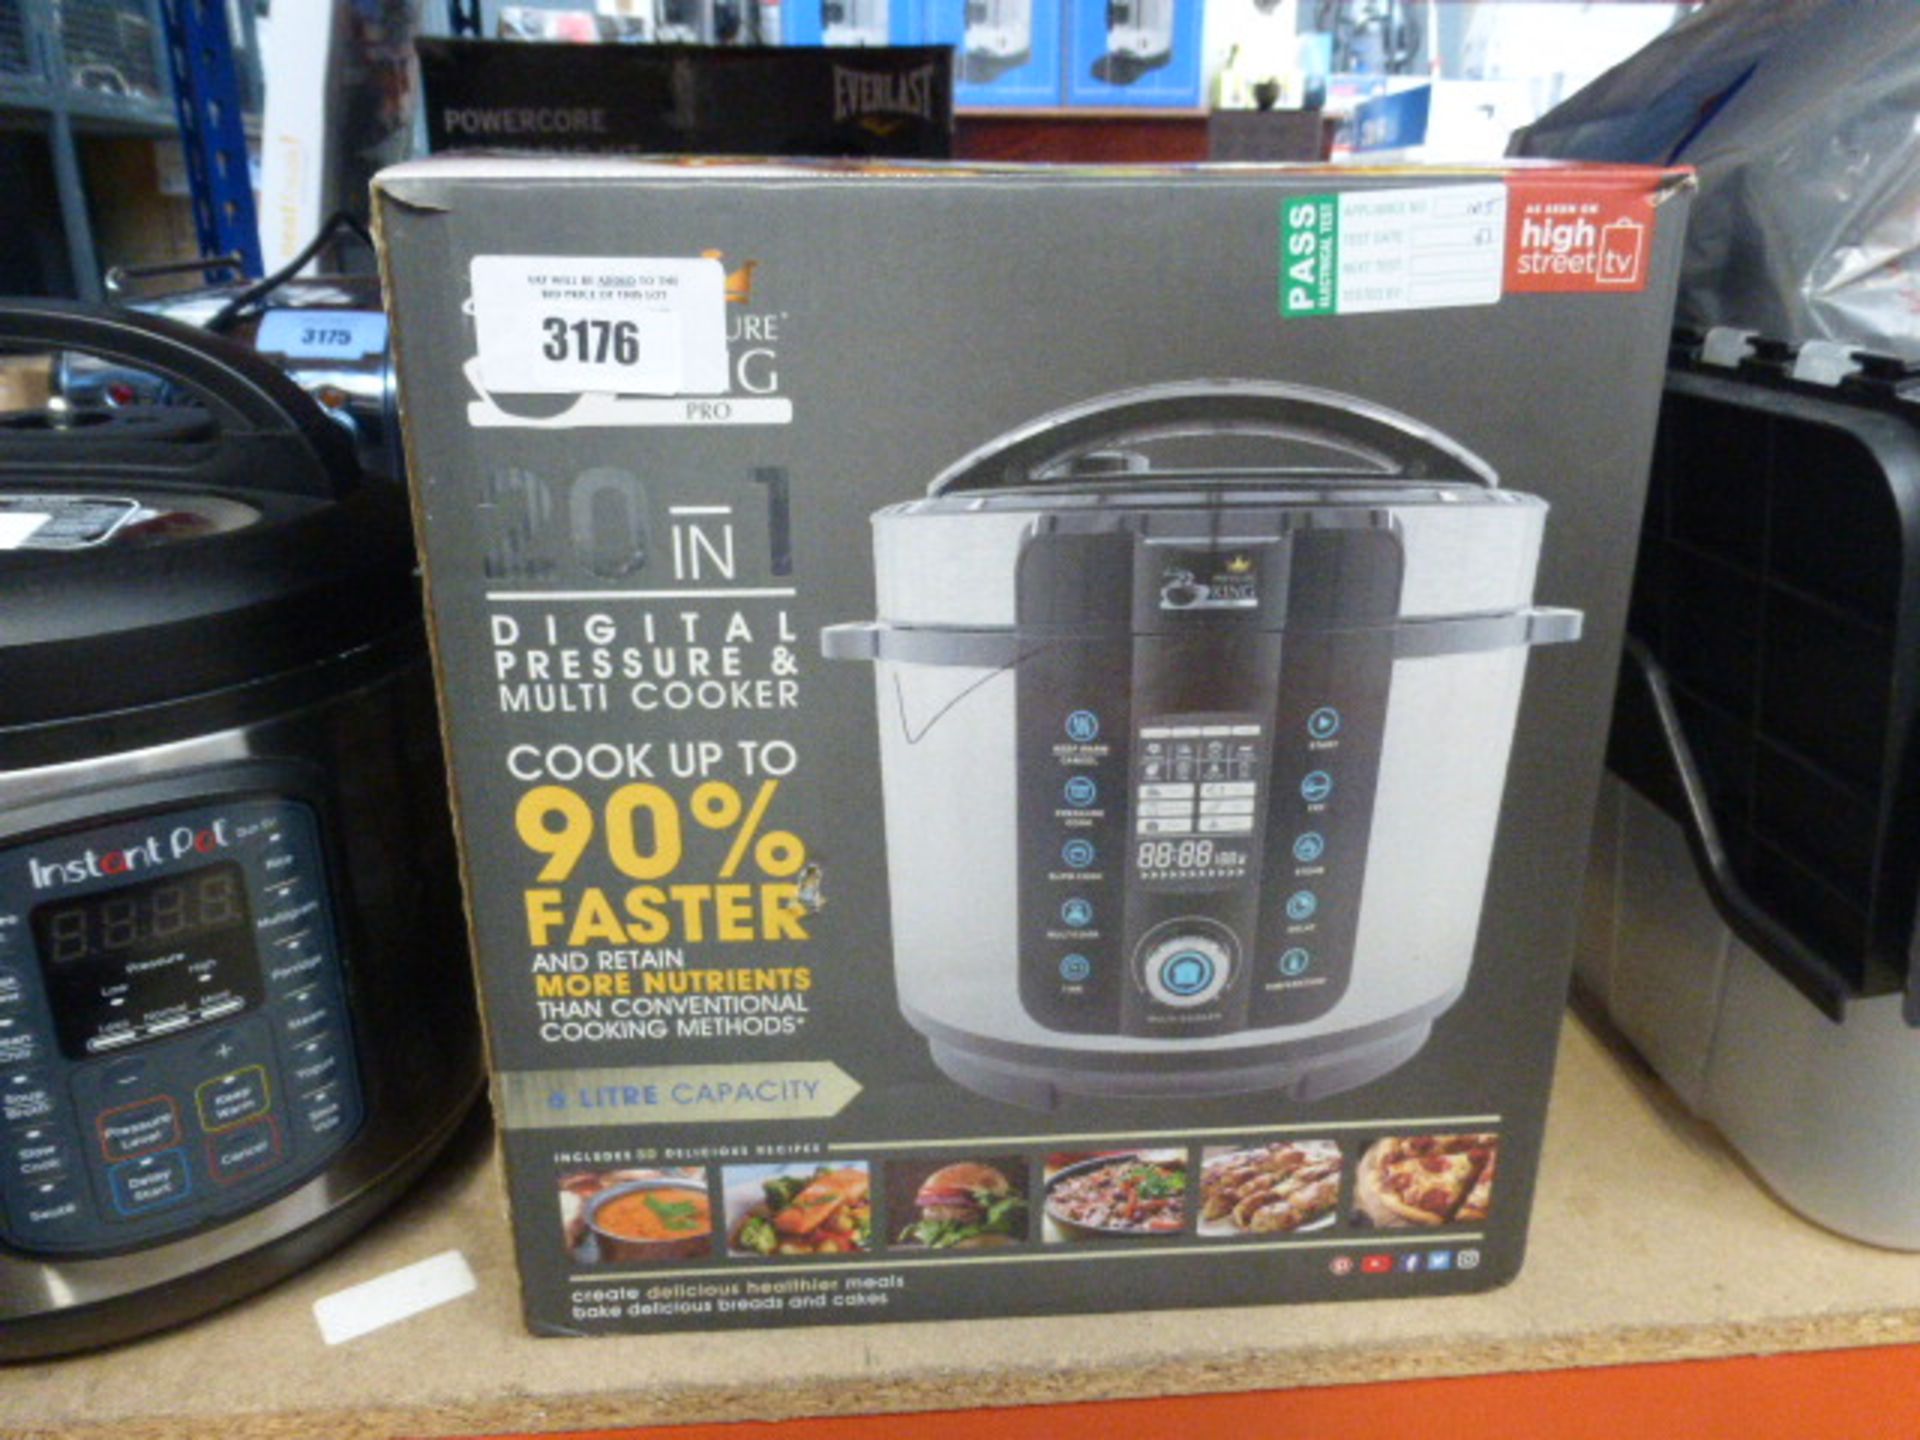 A boxed 20-in-1 digital pressure and multi cooker (used)